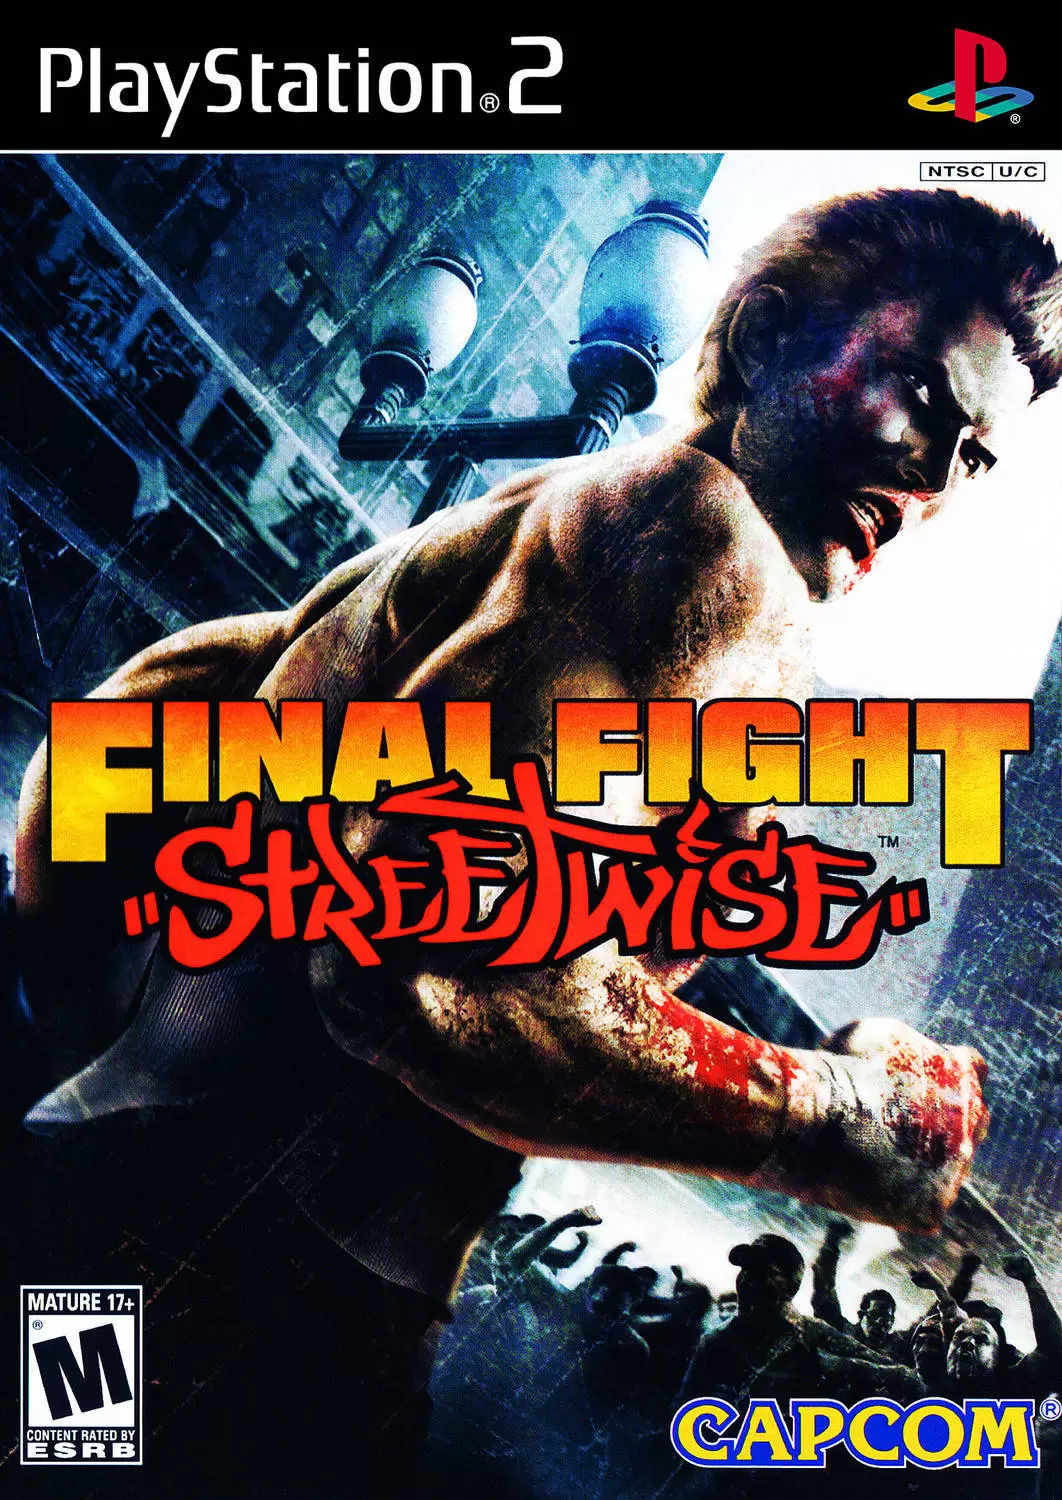 PS2 Games - Final Fight: Streetwise